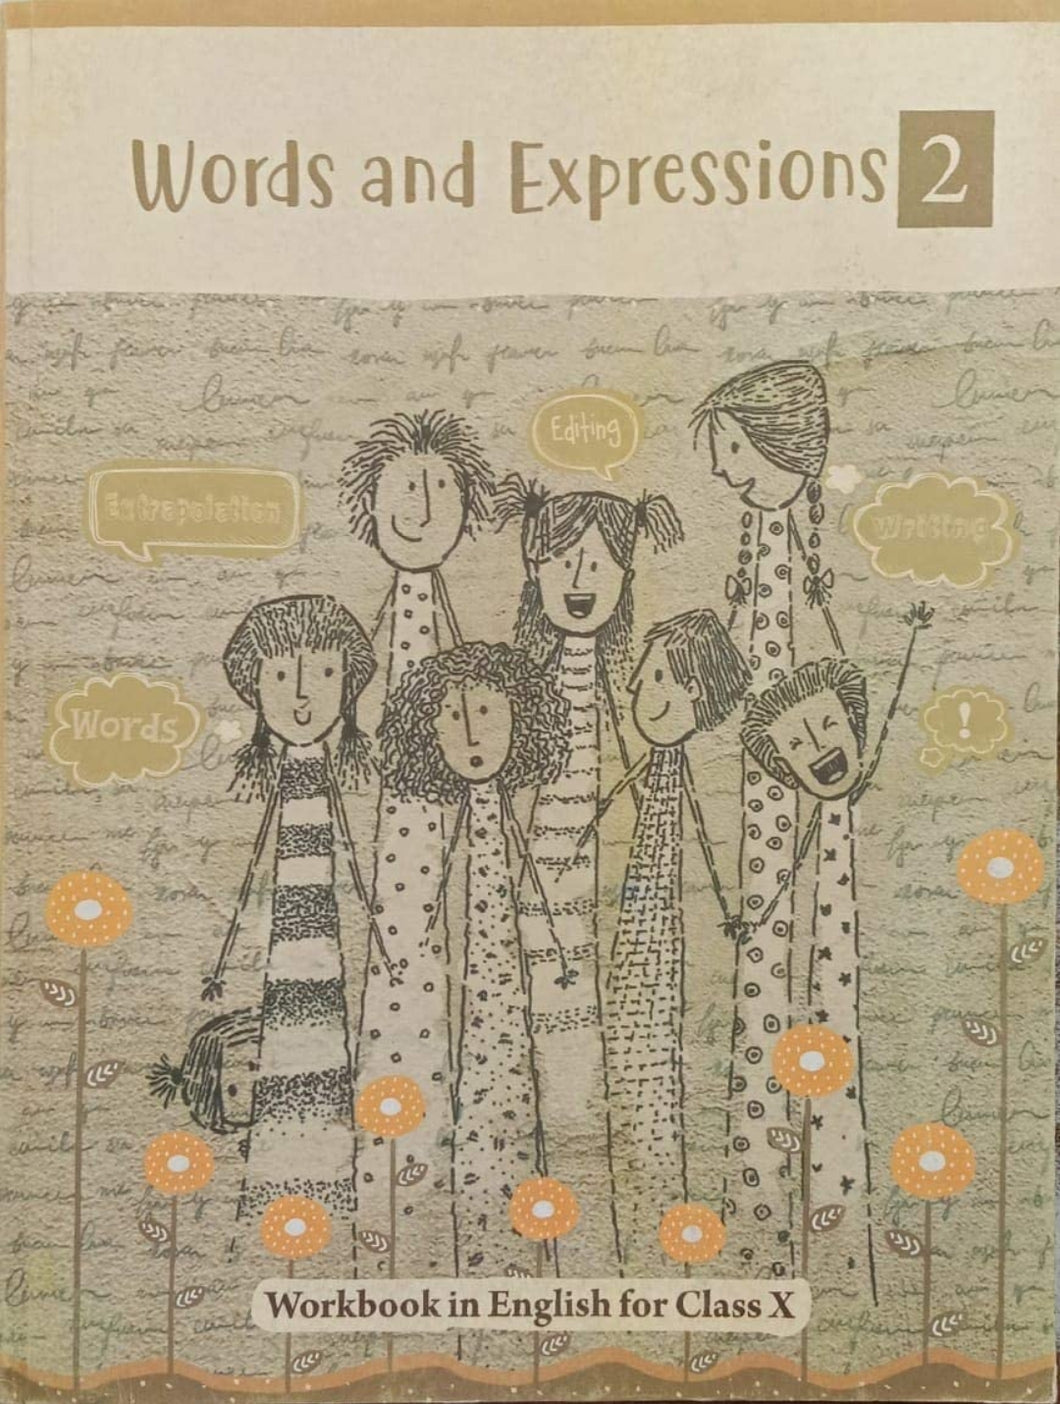 NCERT Words & Expressions 2 for Class 10 - latest edition as per NCERT/CBSE - Booksfy